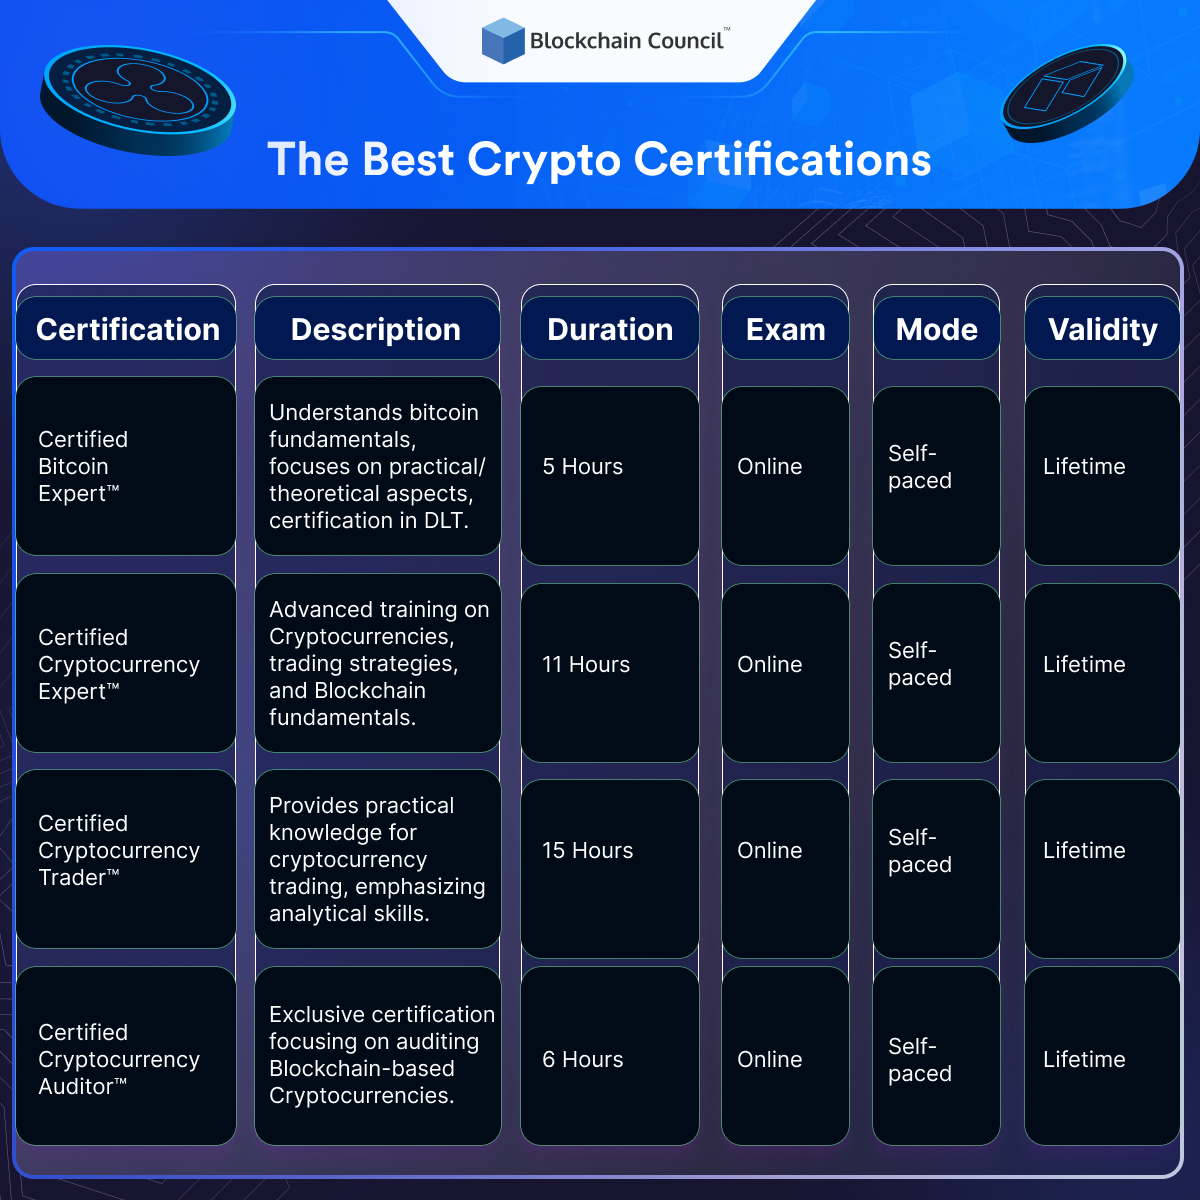 The Best Crypto Certifications (1)